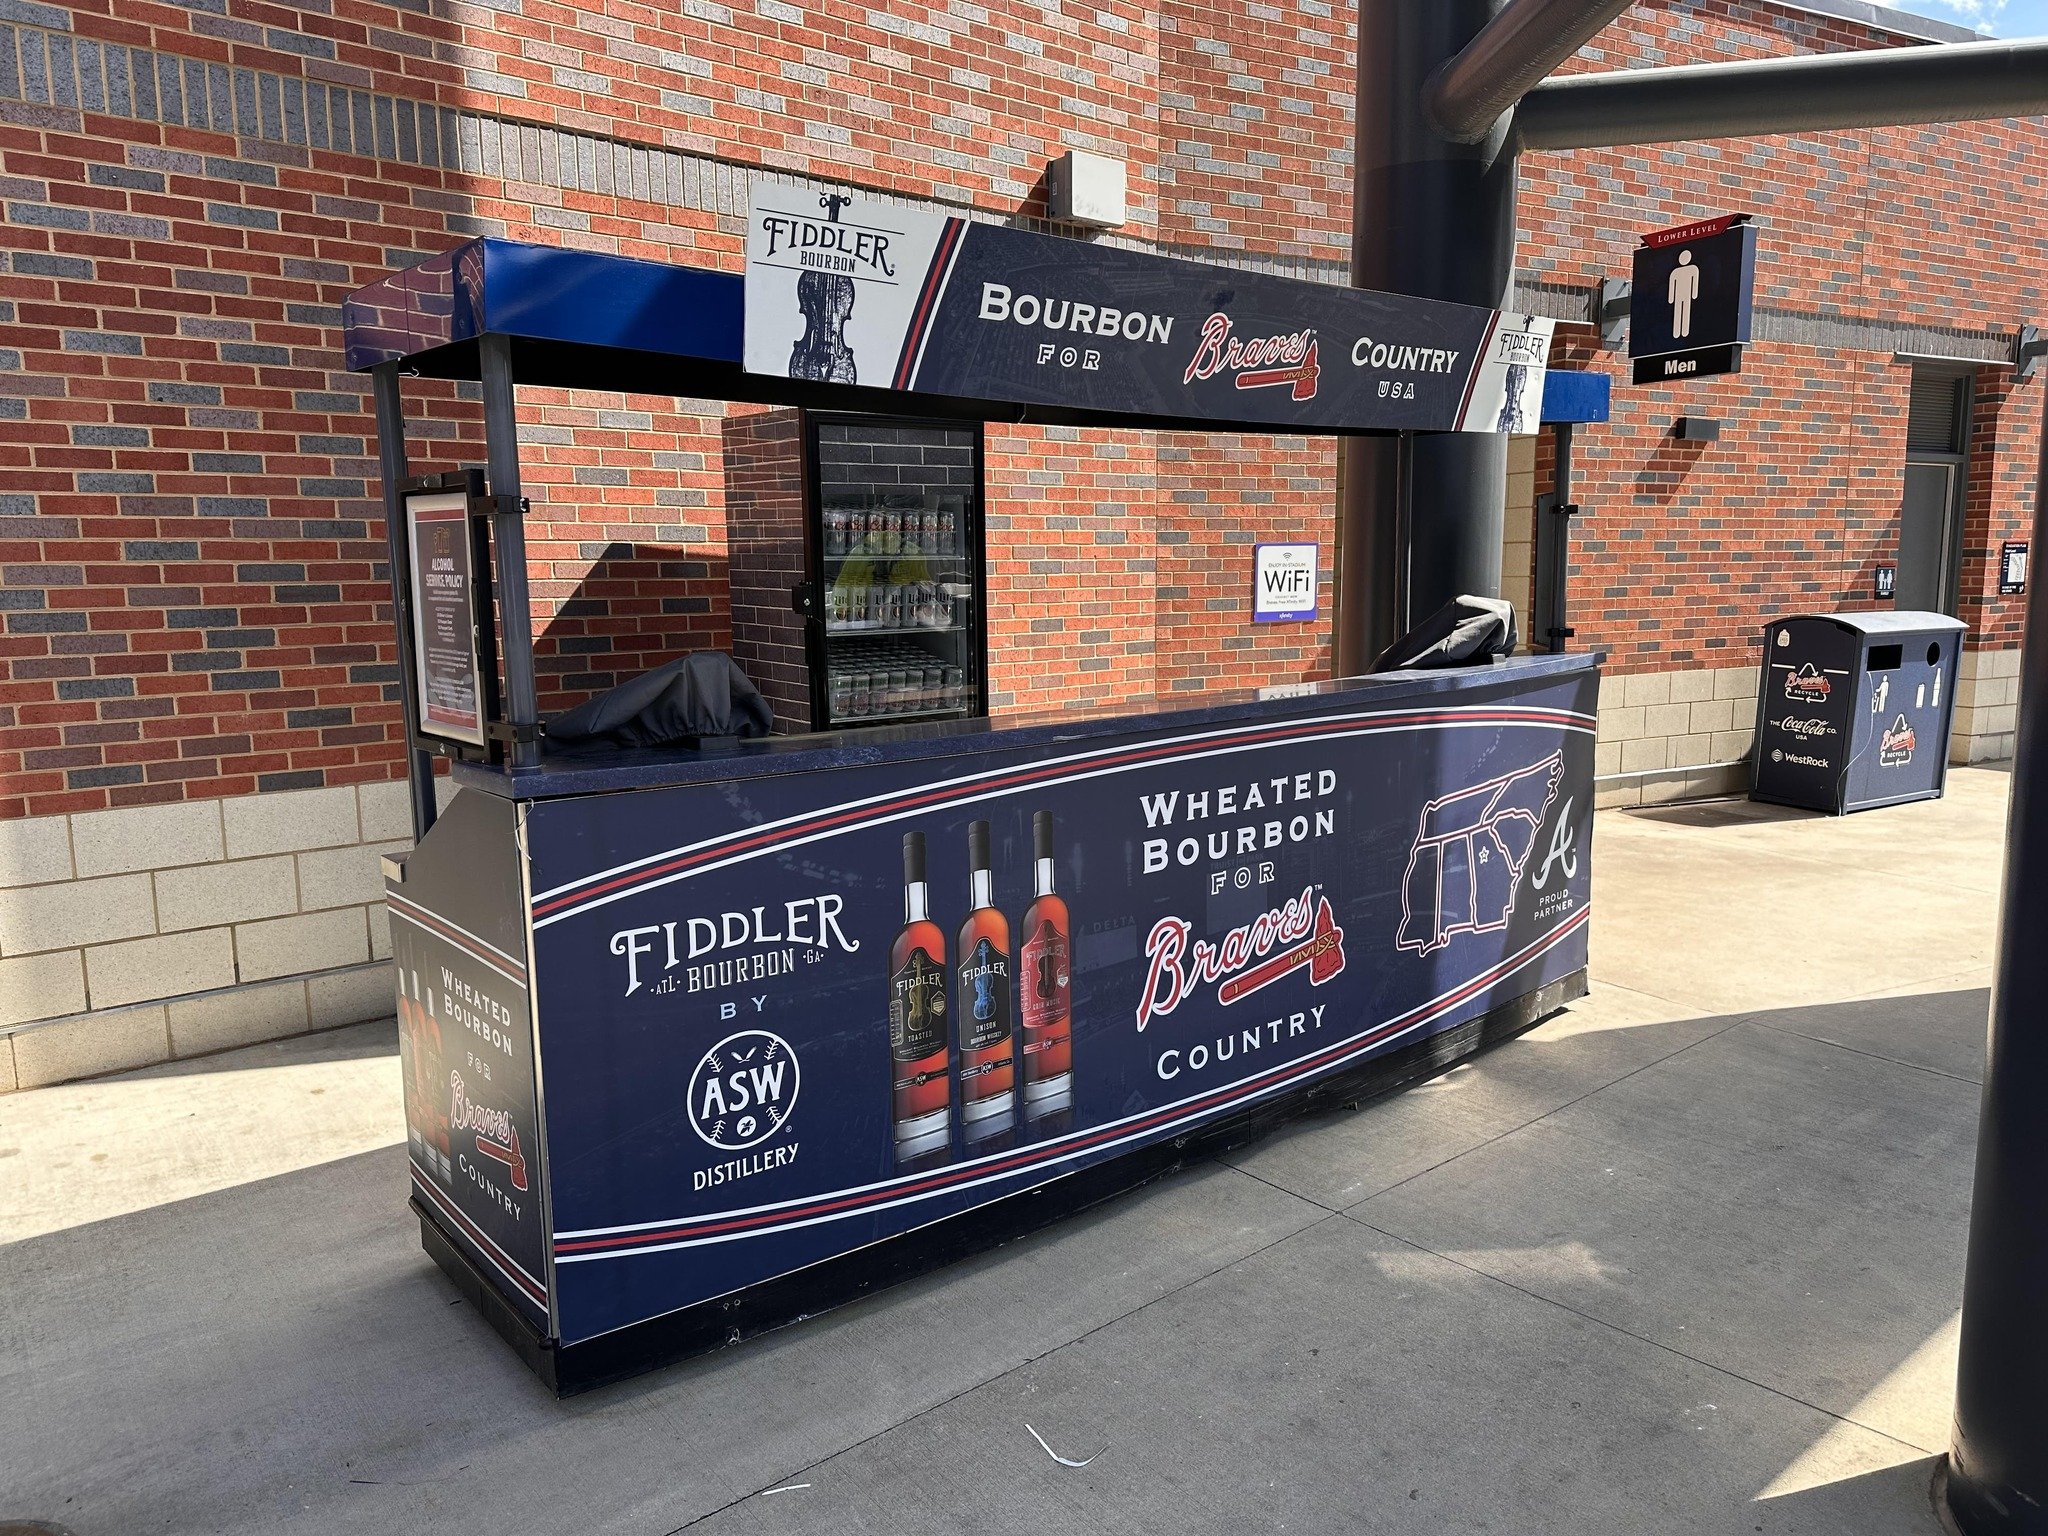 Check out our new digs in the @Braves stadium! Located behind Sections 147/148 in left field, it has lots of your favorite Fiddler Bourbons, Winterville Gin, and more. 

Perfect for your sipping preferences with the home stand starting tonight &ndash